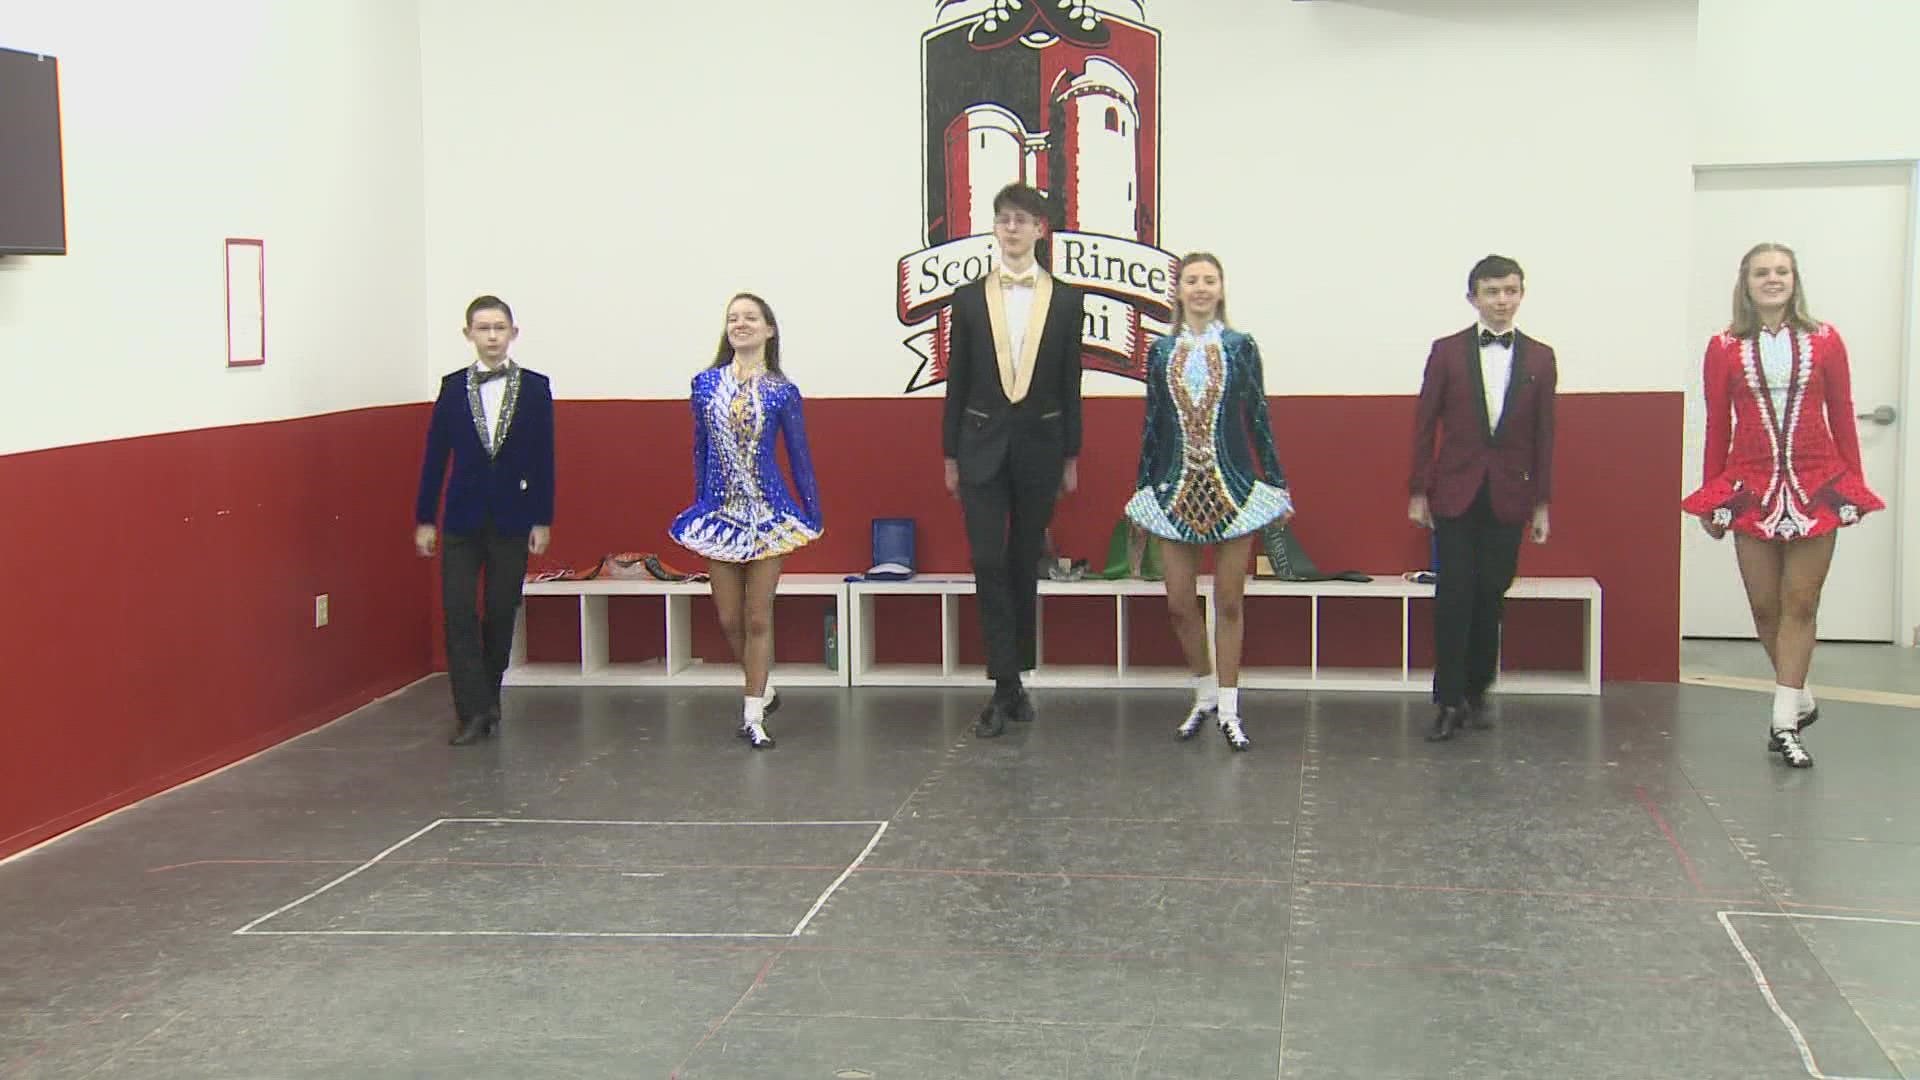 The SRL Academy will be dancing at this weekend's St. Patrick's Day parade in Hartford